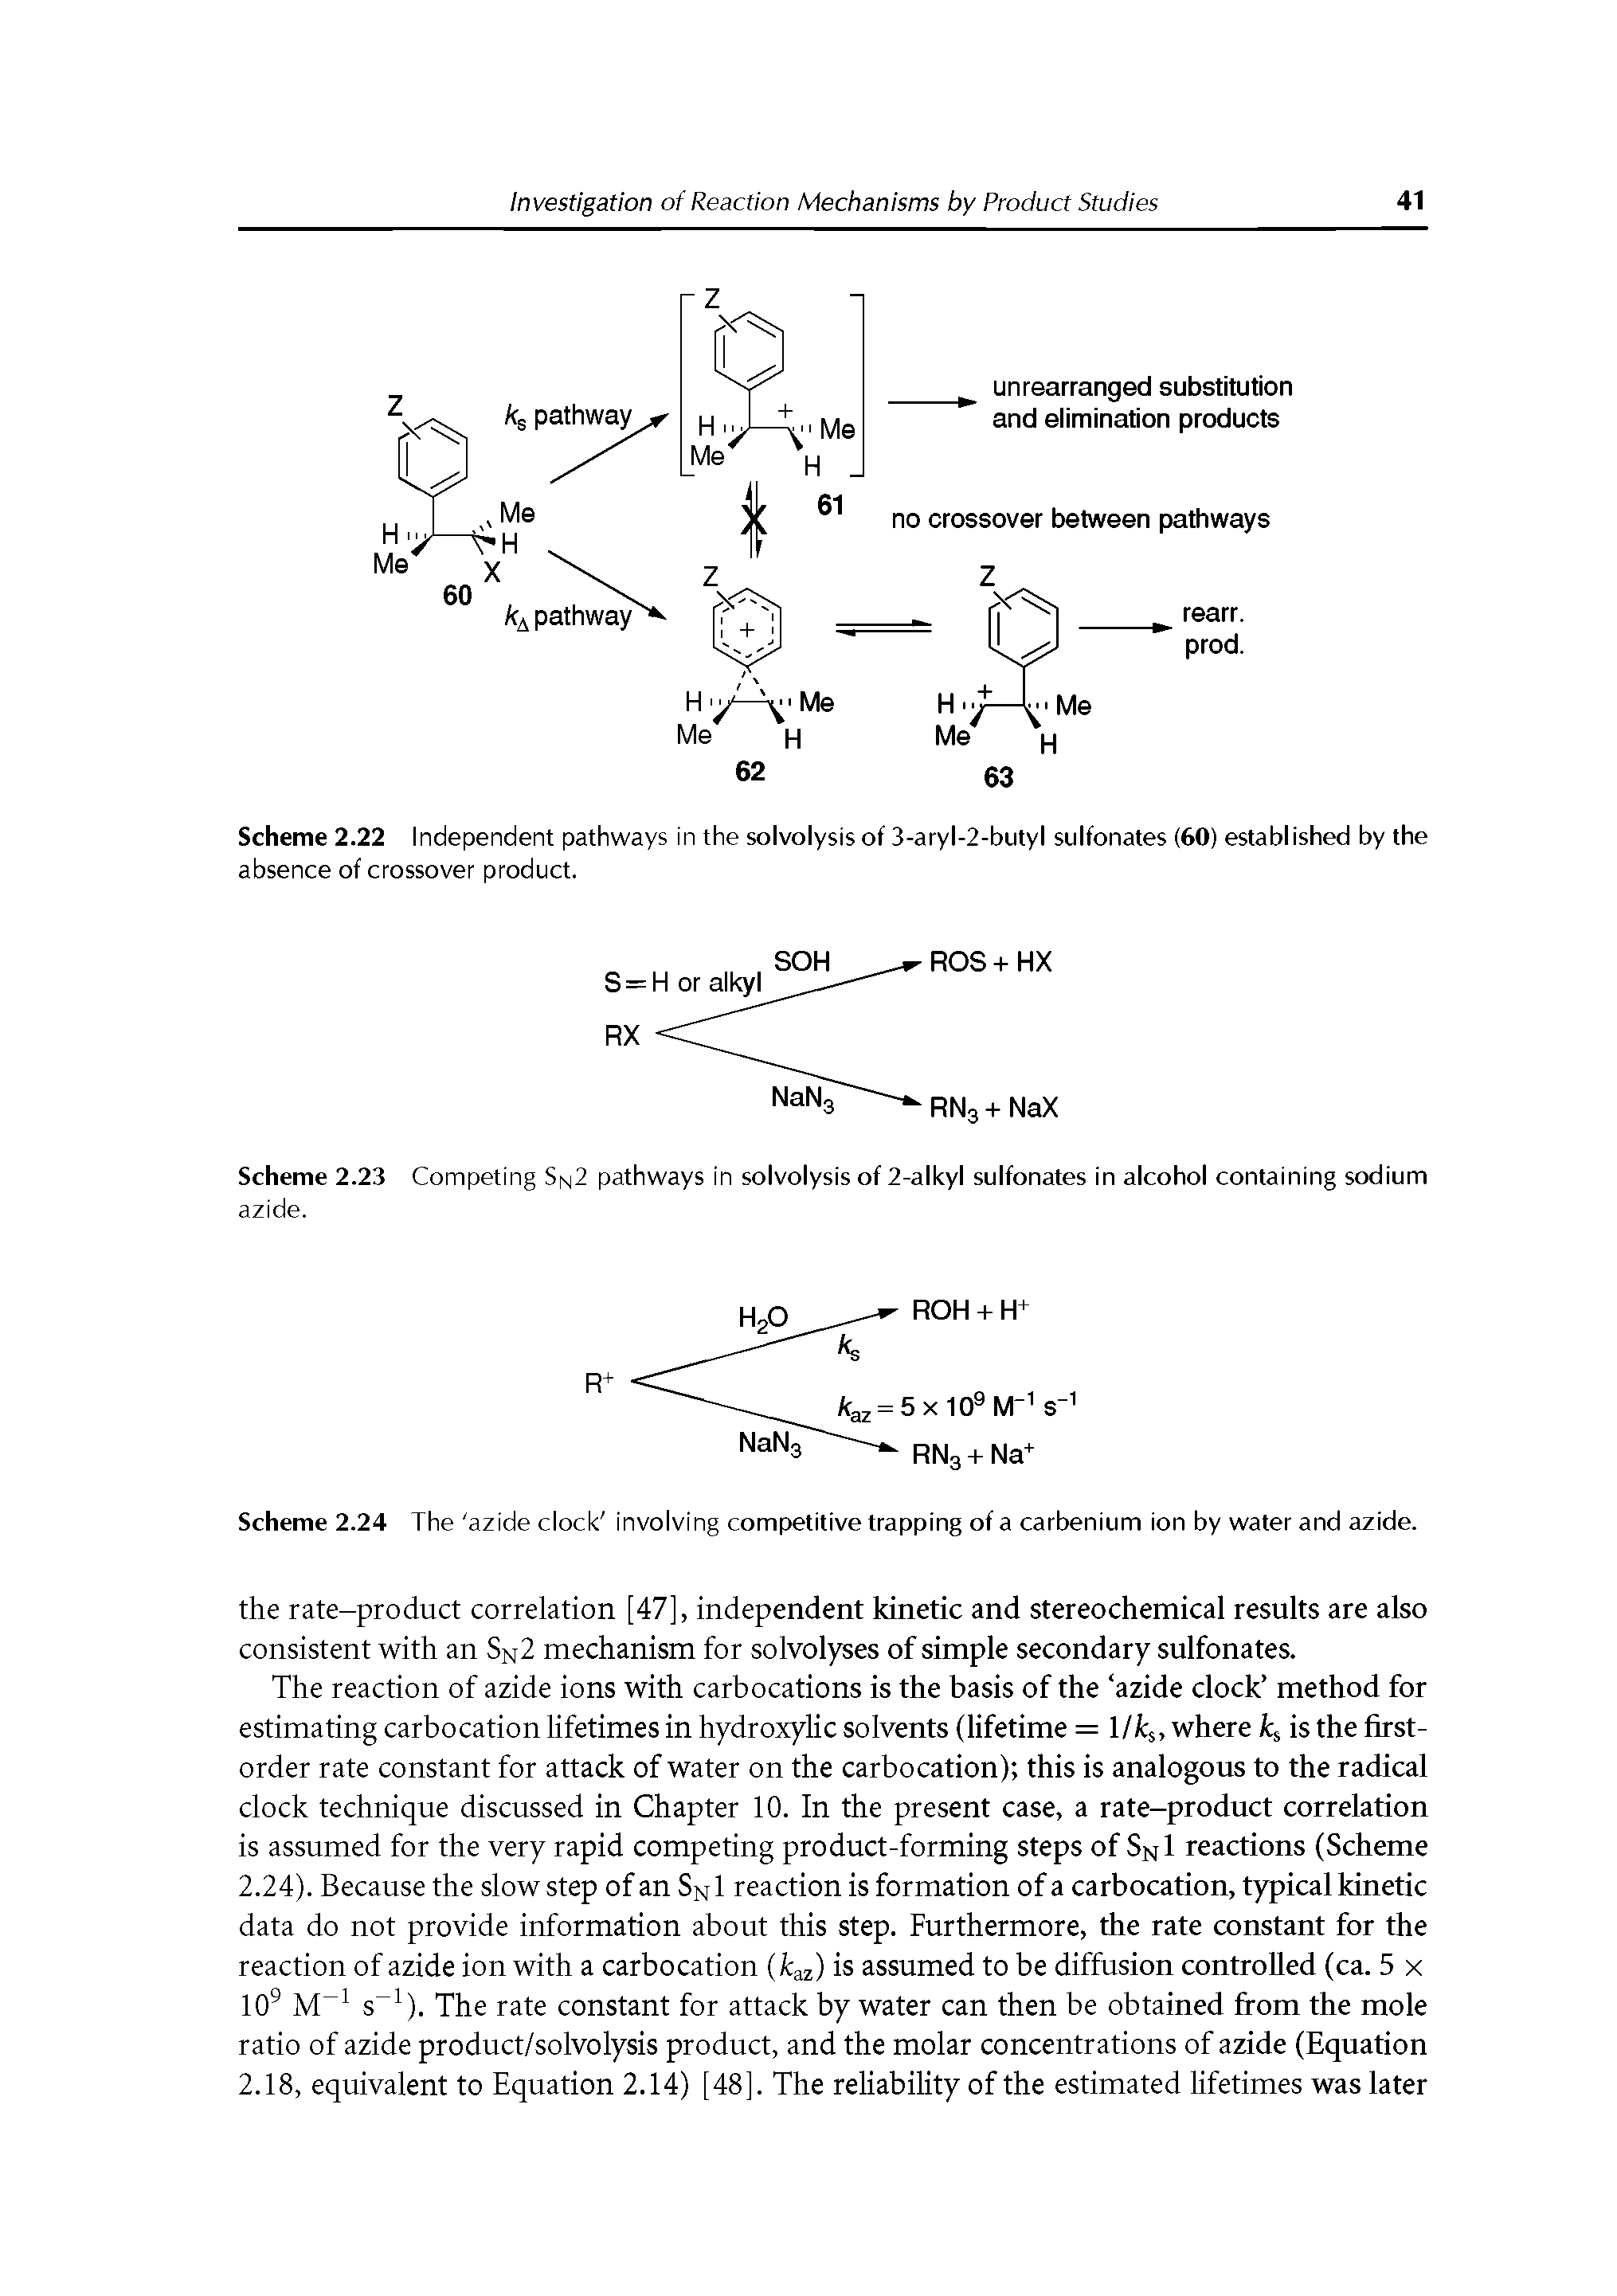 Scheme 2.22 Independent pathways in the solvolysis of 3-aryl-2-butyl sulfonates (60) established by the absence of crossover product.